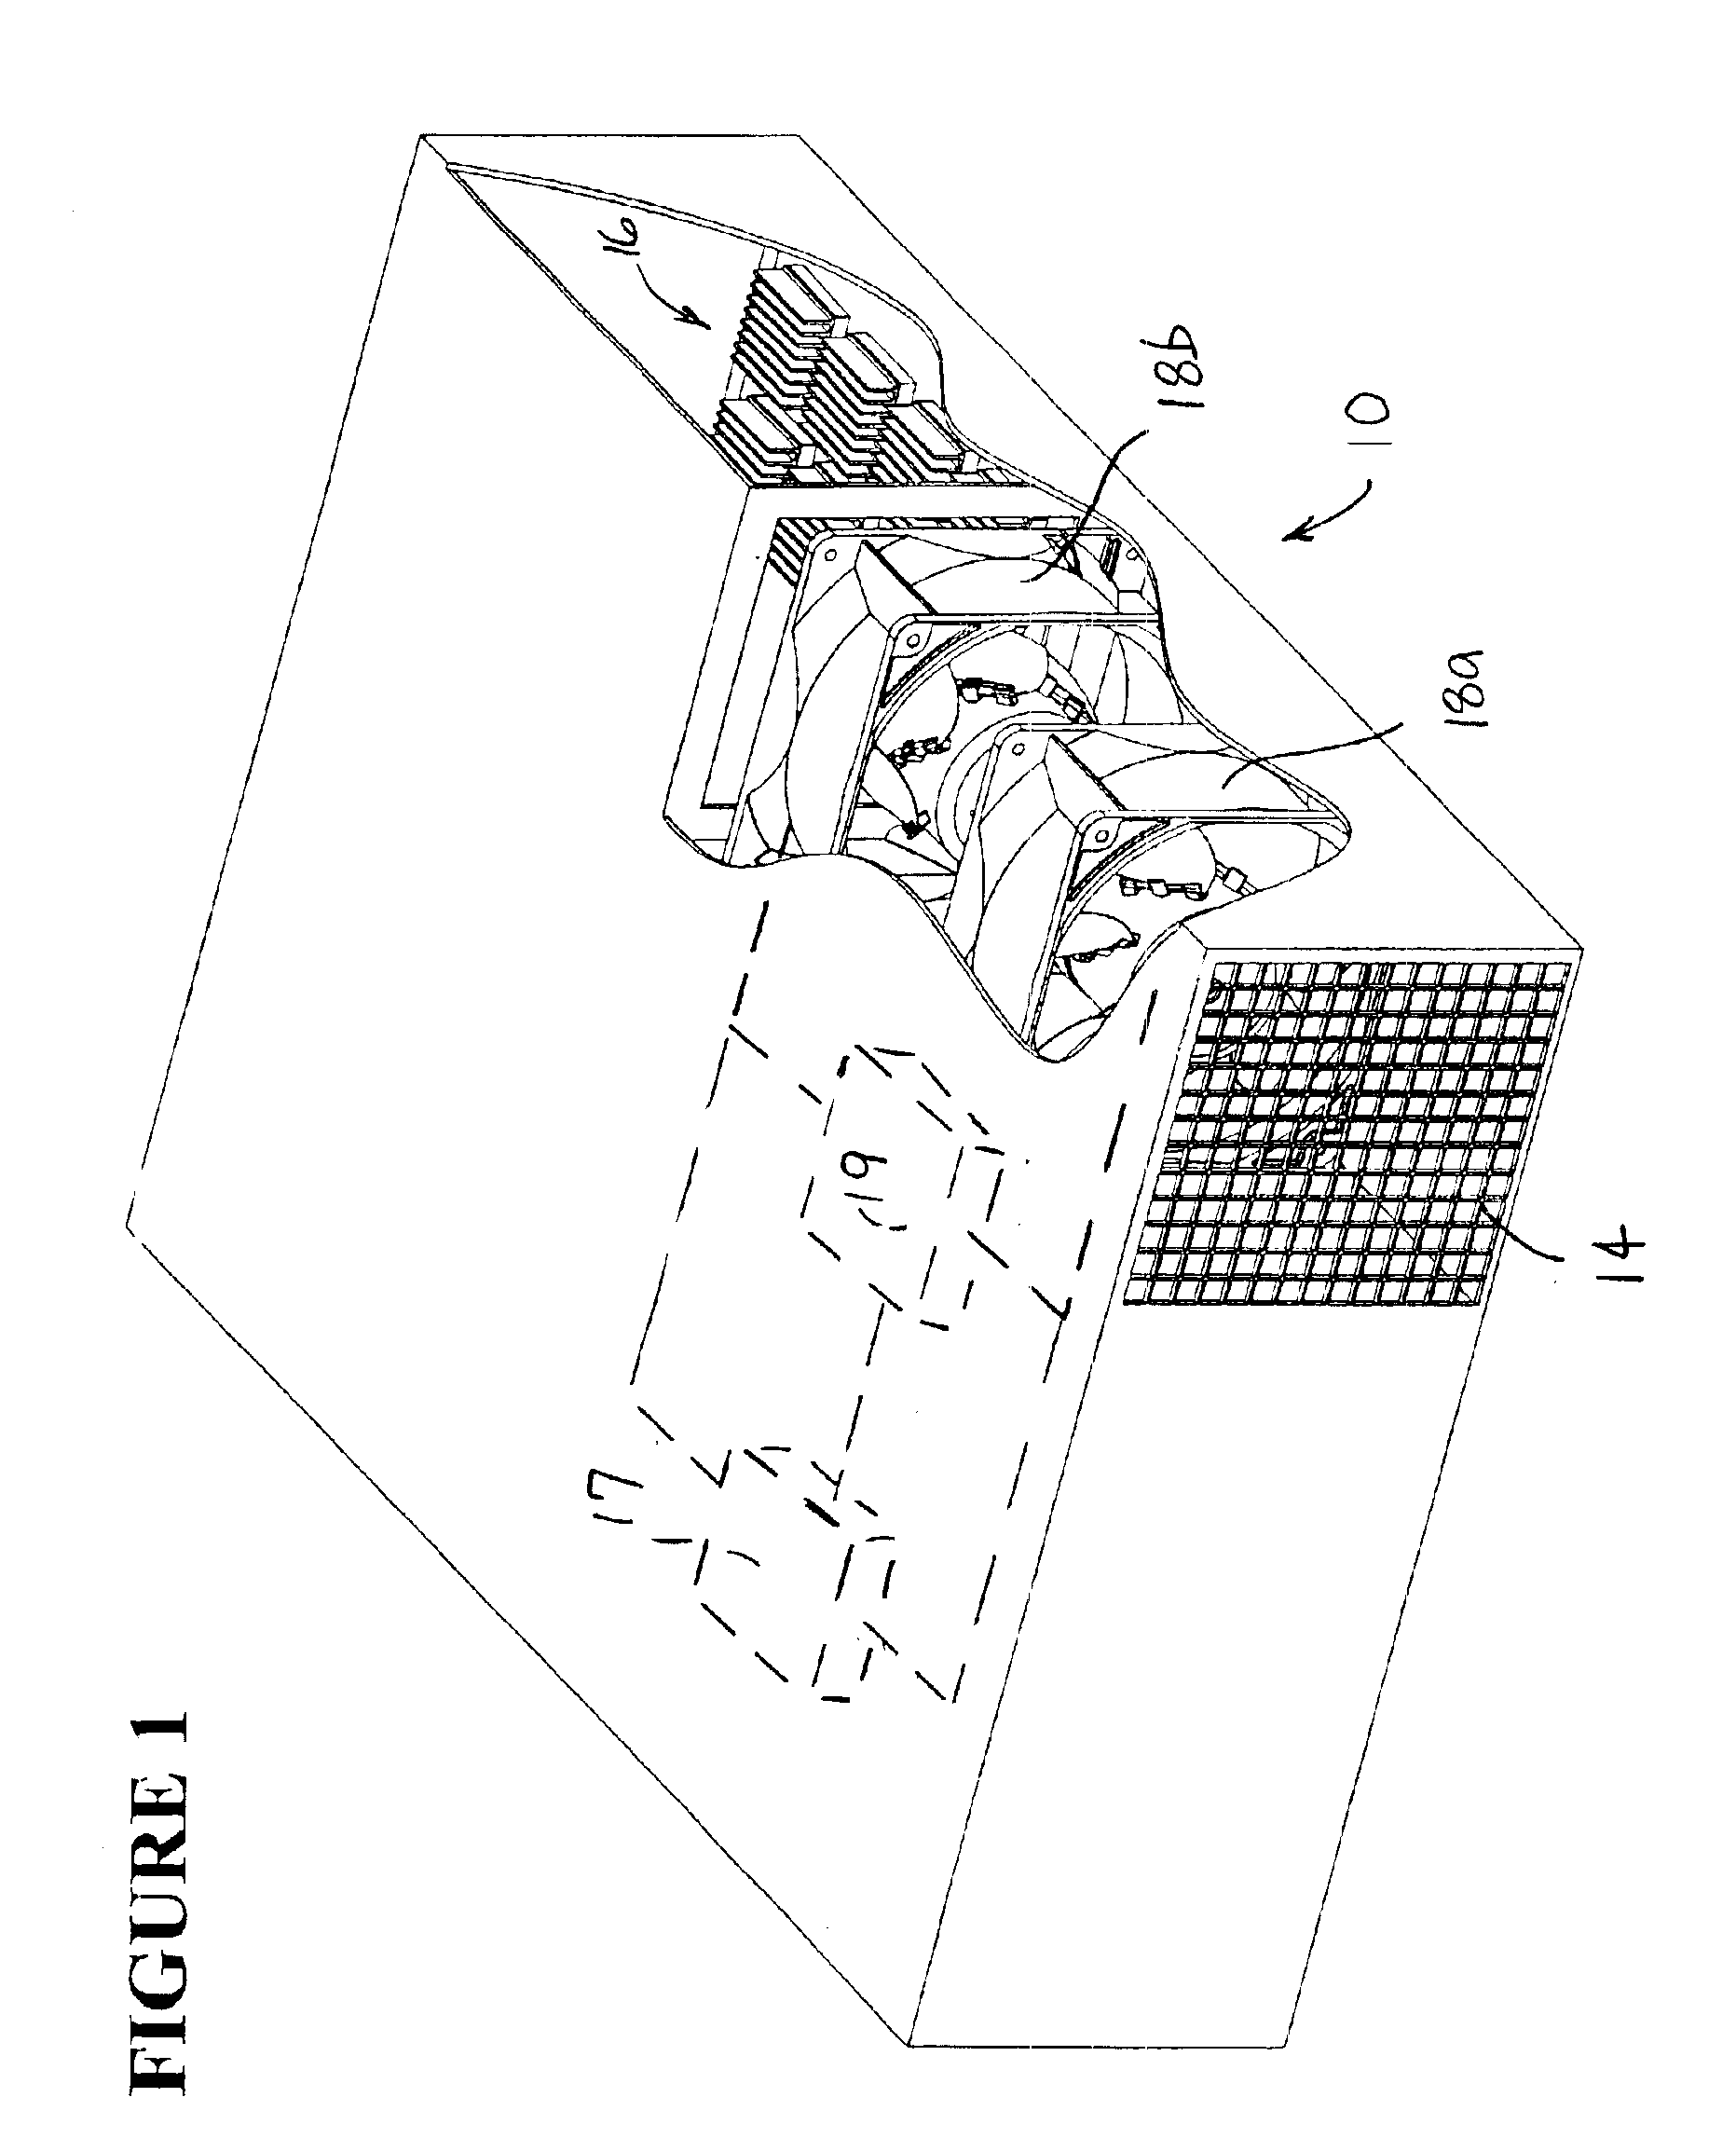 Fan with collapsible blades, redundant fan system, and related method